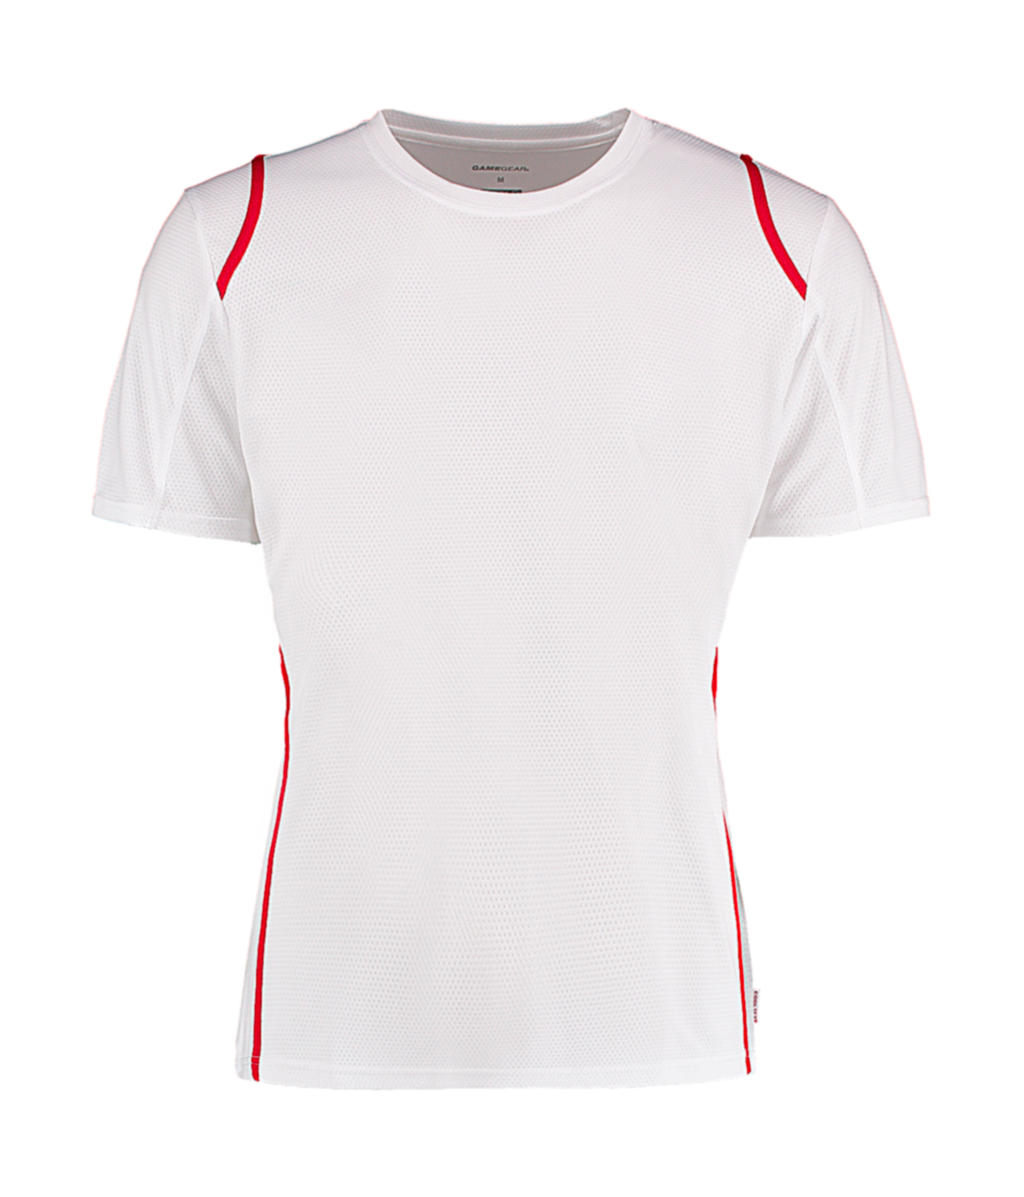  Regular Fit Cooltex? Contrast Tee in Farbe White/Red